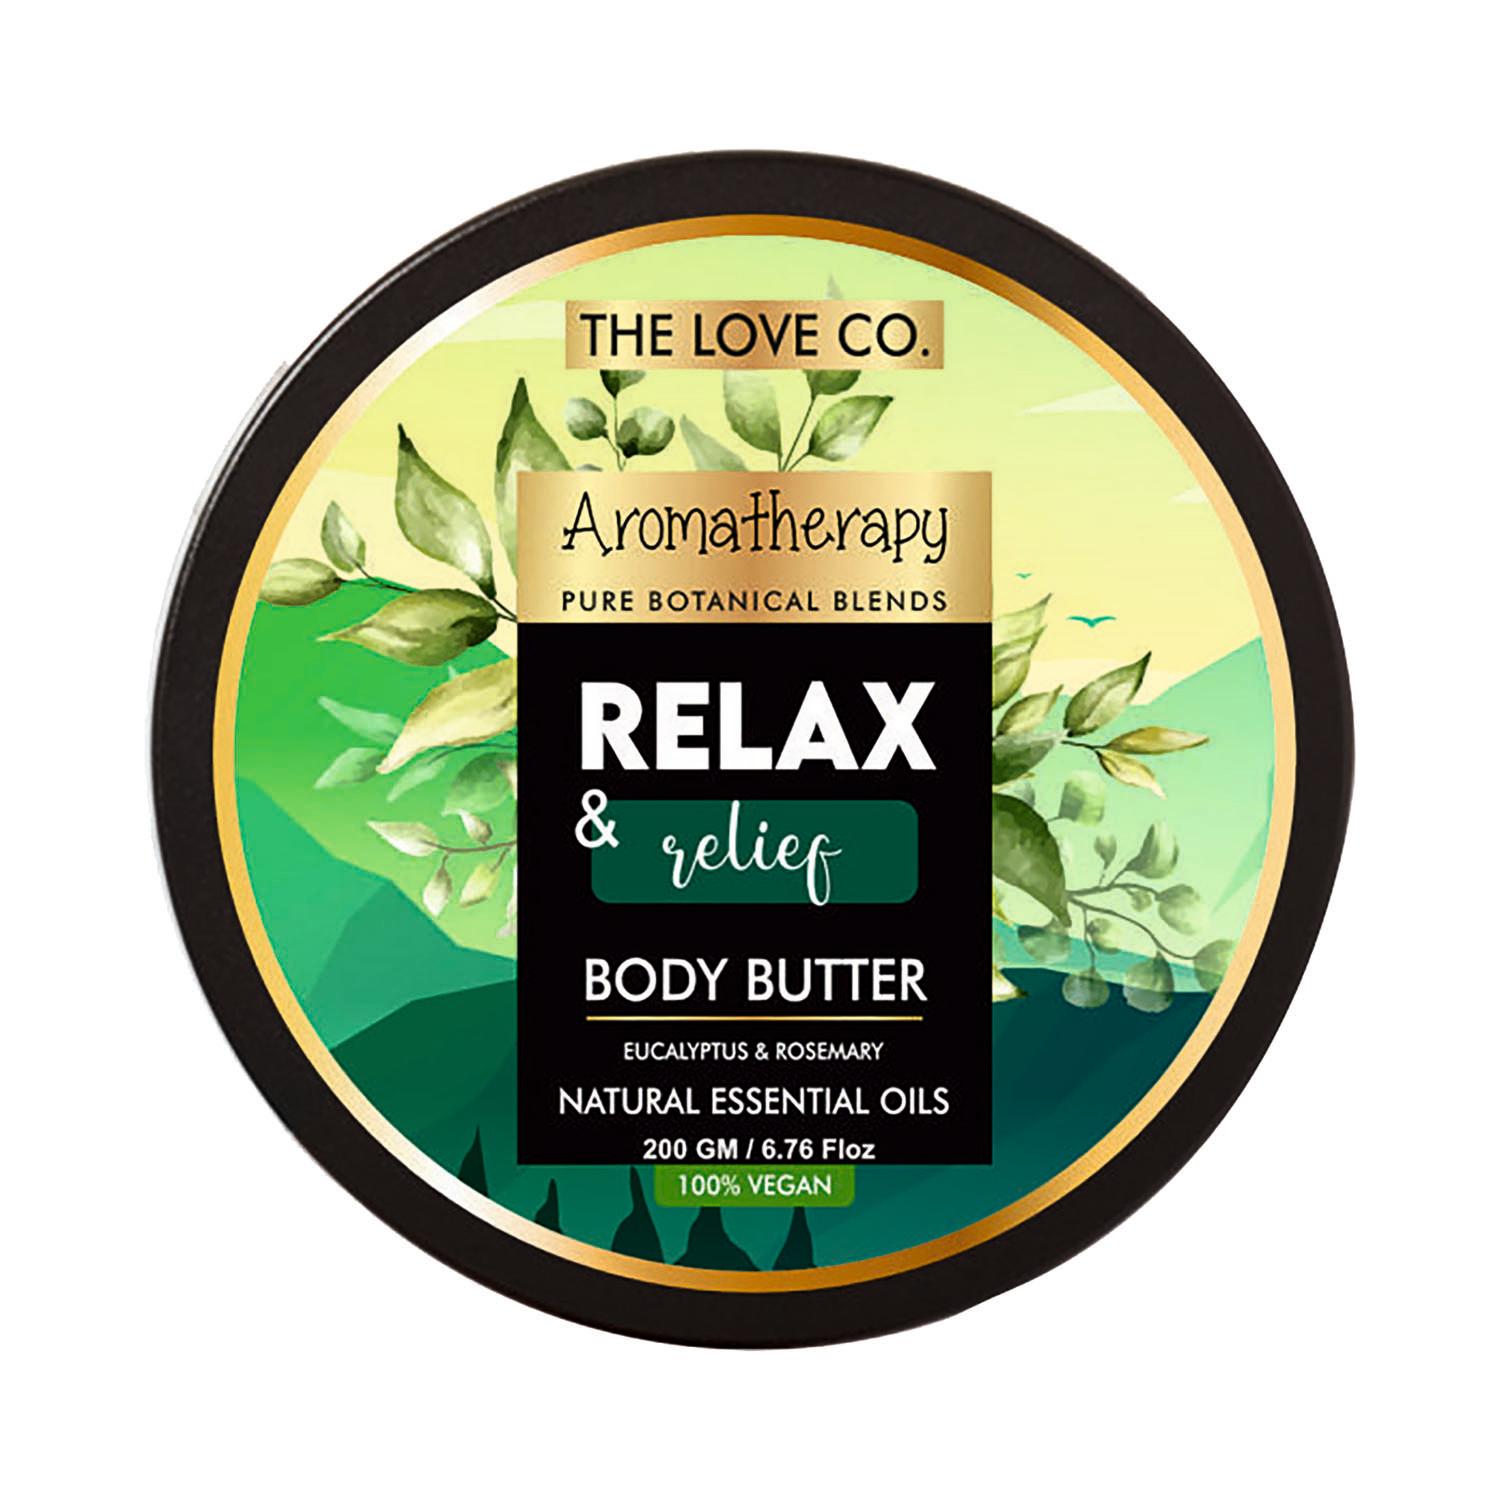 THE LOVE CO. | THE LOVE CO. The Love Co Aromatherapy Relax and Relief Body Butter With Eucalyptus & Rosemary (200g)